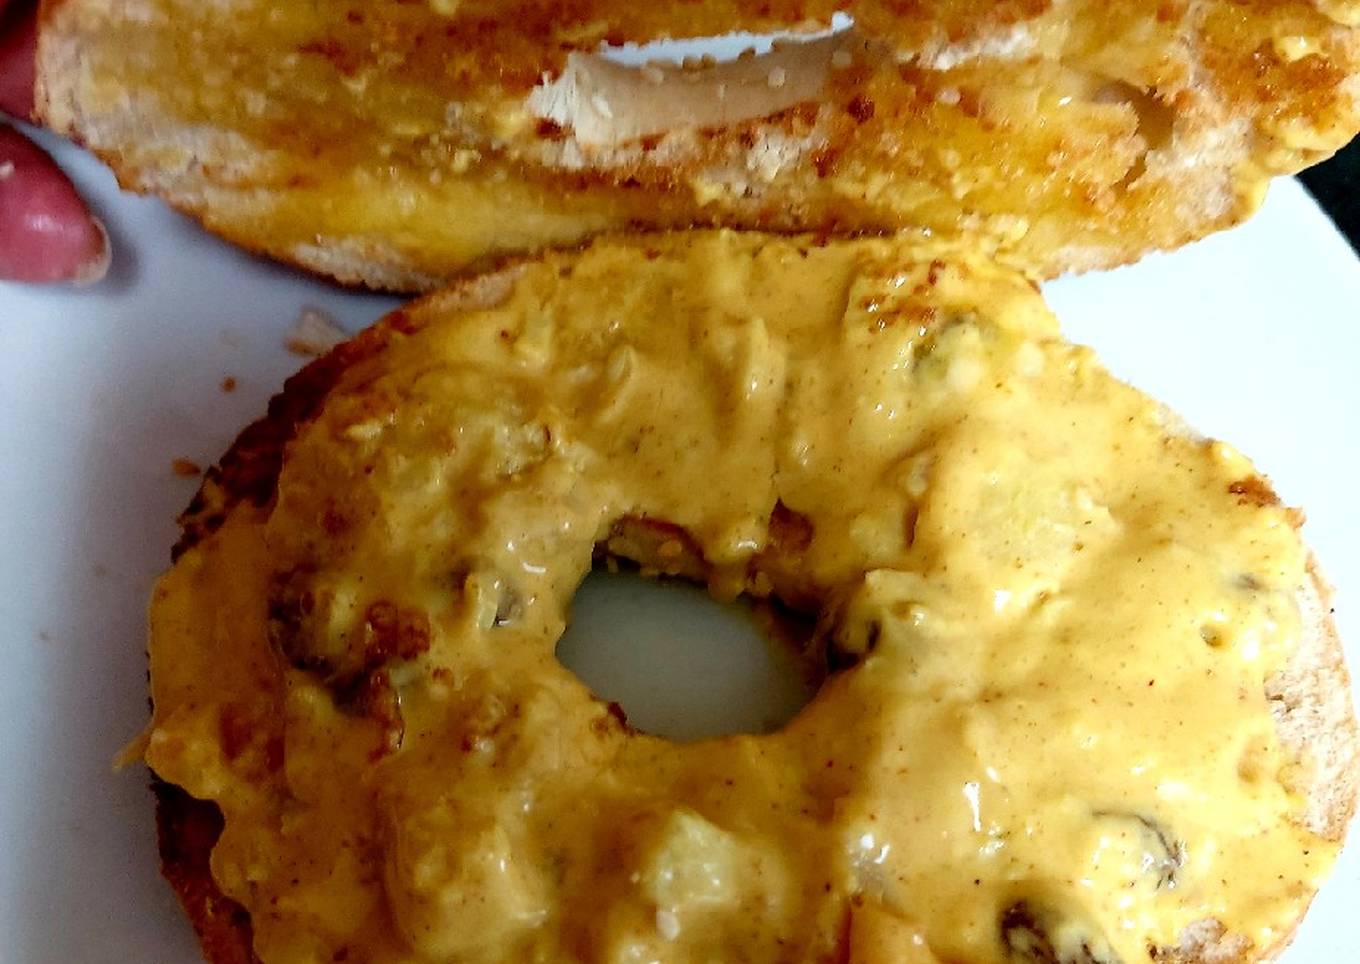 my coronation chicken toasted bagel